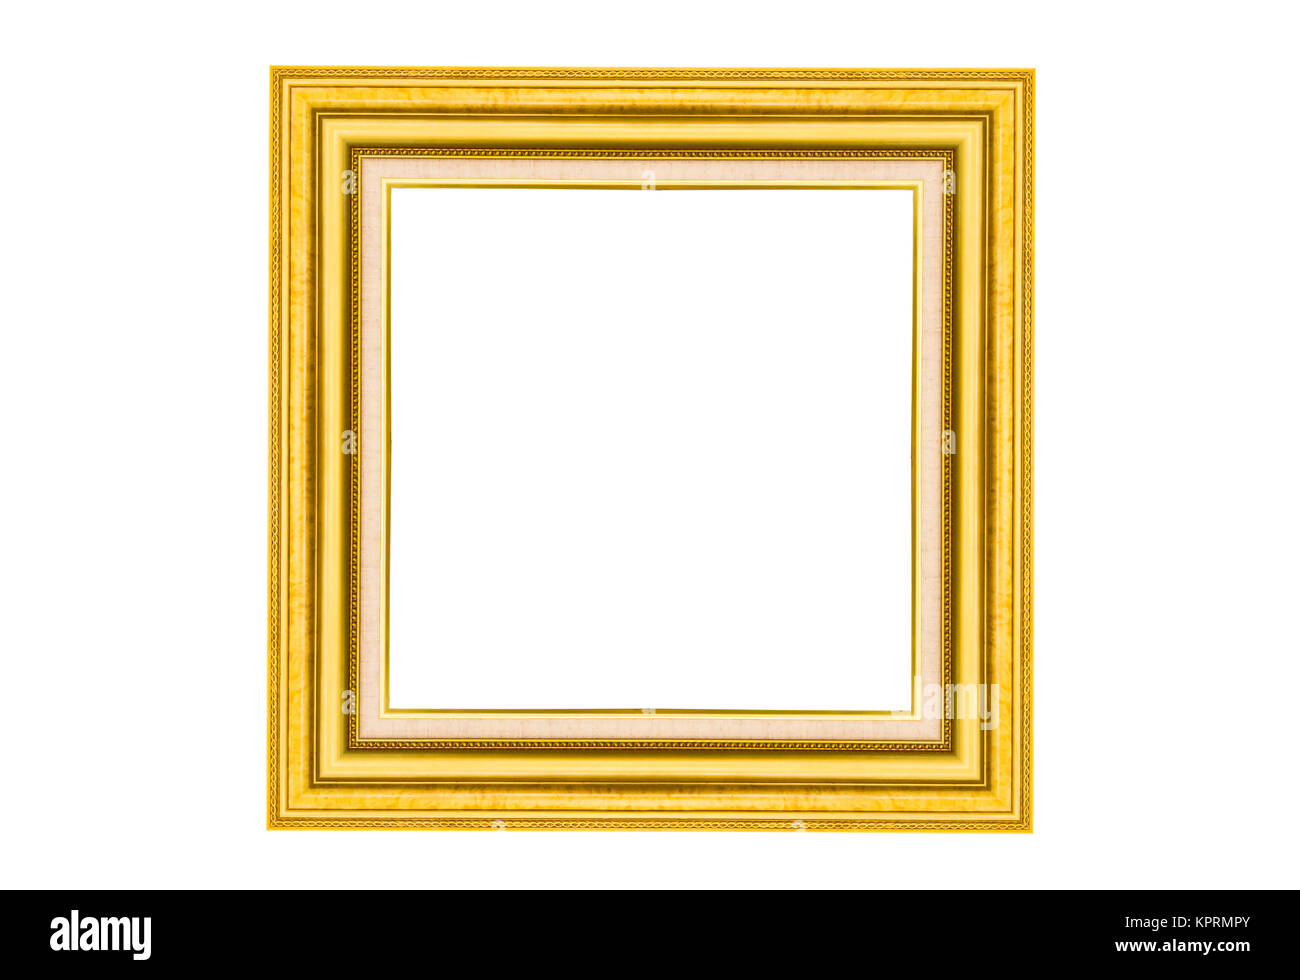 Golden wood picture frame Stock Photo